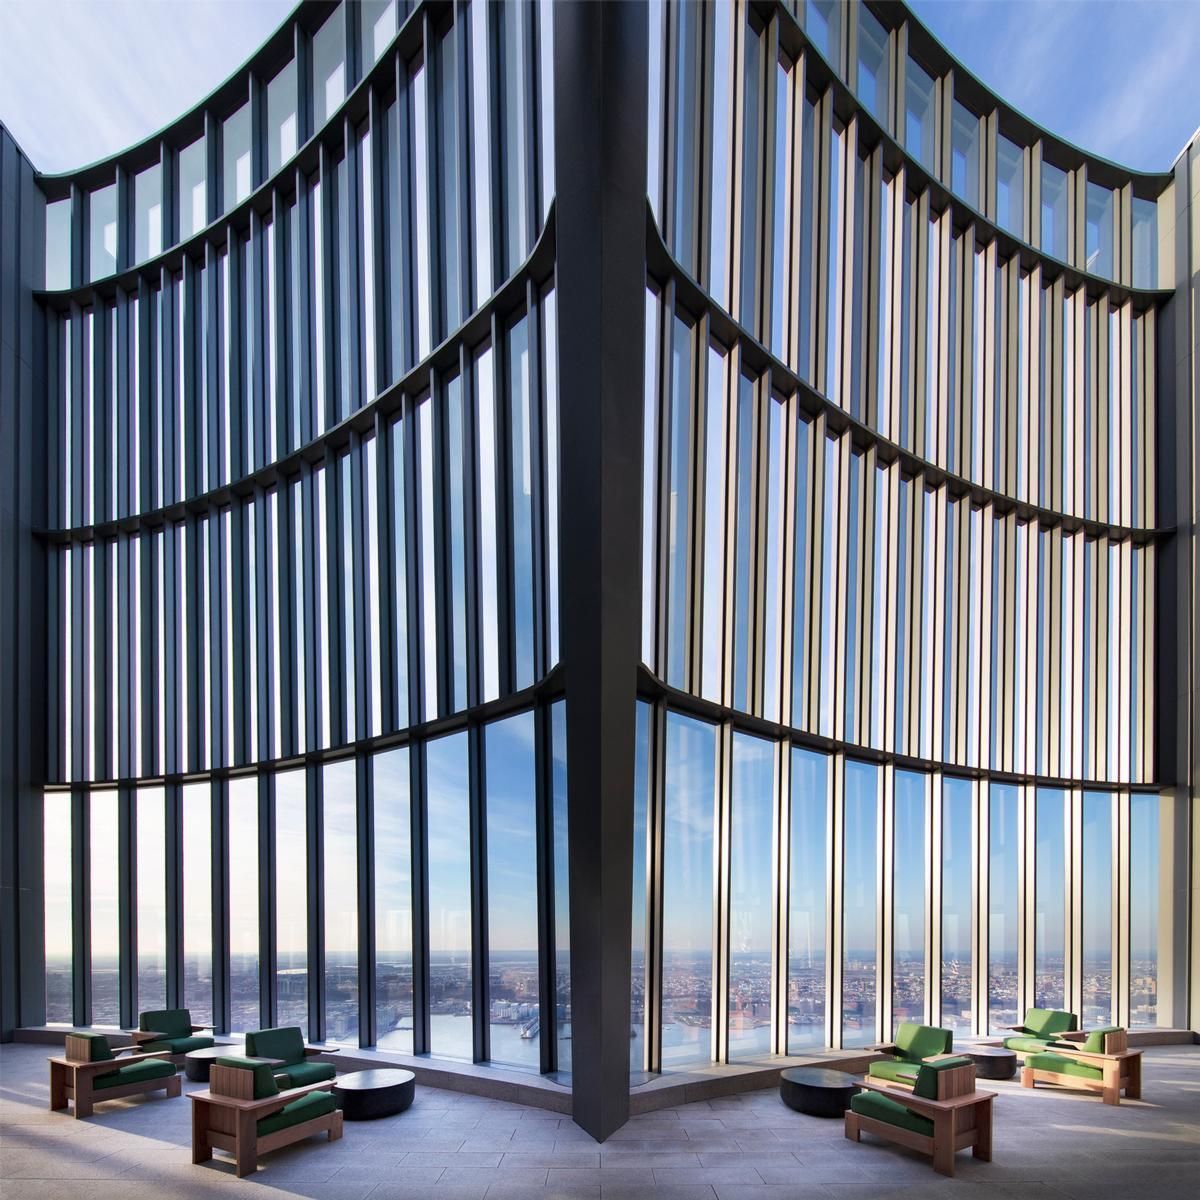 New York's Highest Outdoor Residential Amenity Space Opens at Fifteen Hudson Yards